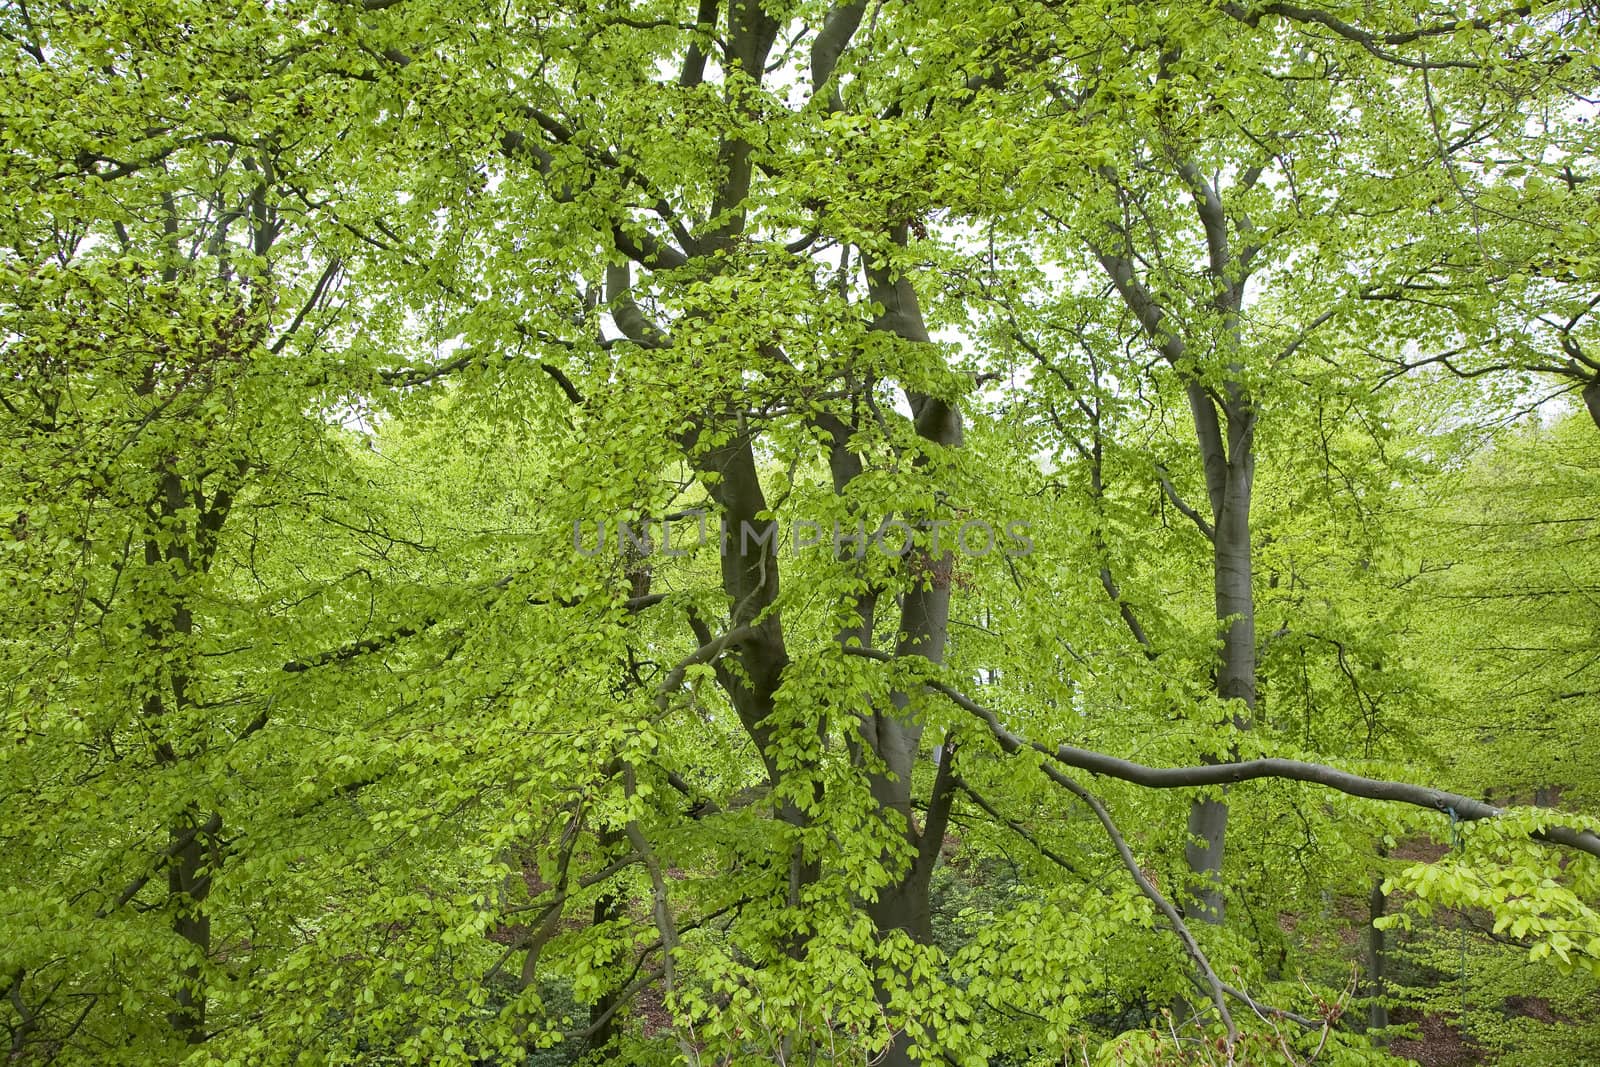 Beech leaves all over. Capture from a Swdish park with very old beeches at springtime.